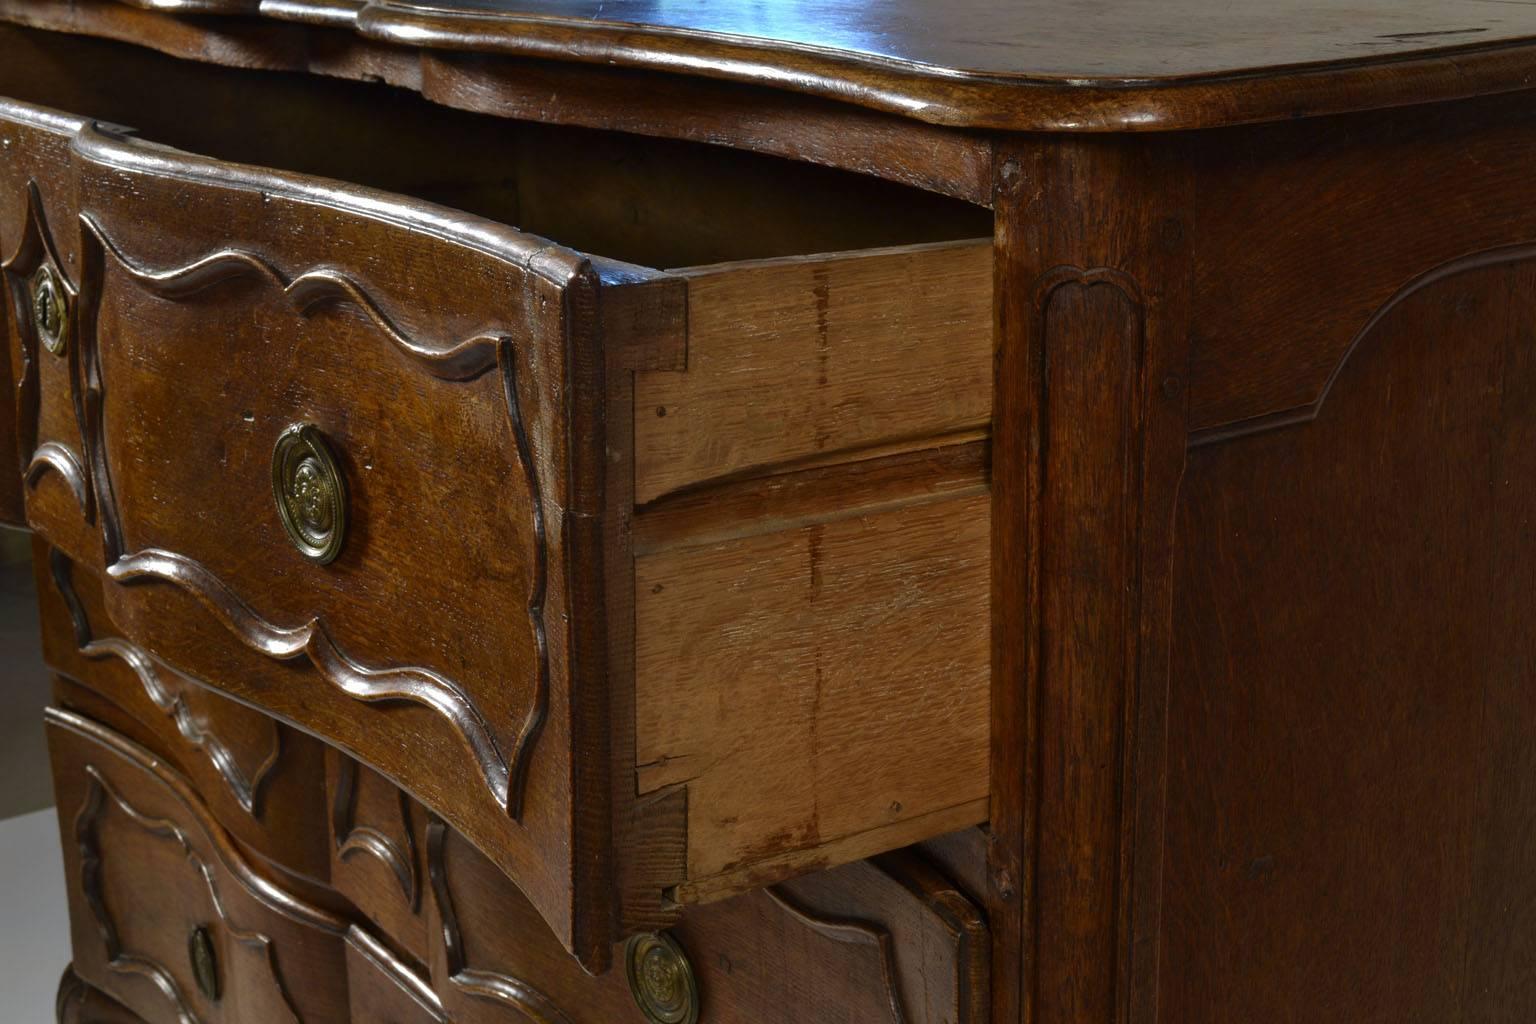 A French provincial carved oak commode, 18th century, serpentine top, the blocked case with three drawers, panelled chamfered stiles, C-scrolled apron centred by a shell, and cabriole legs.